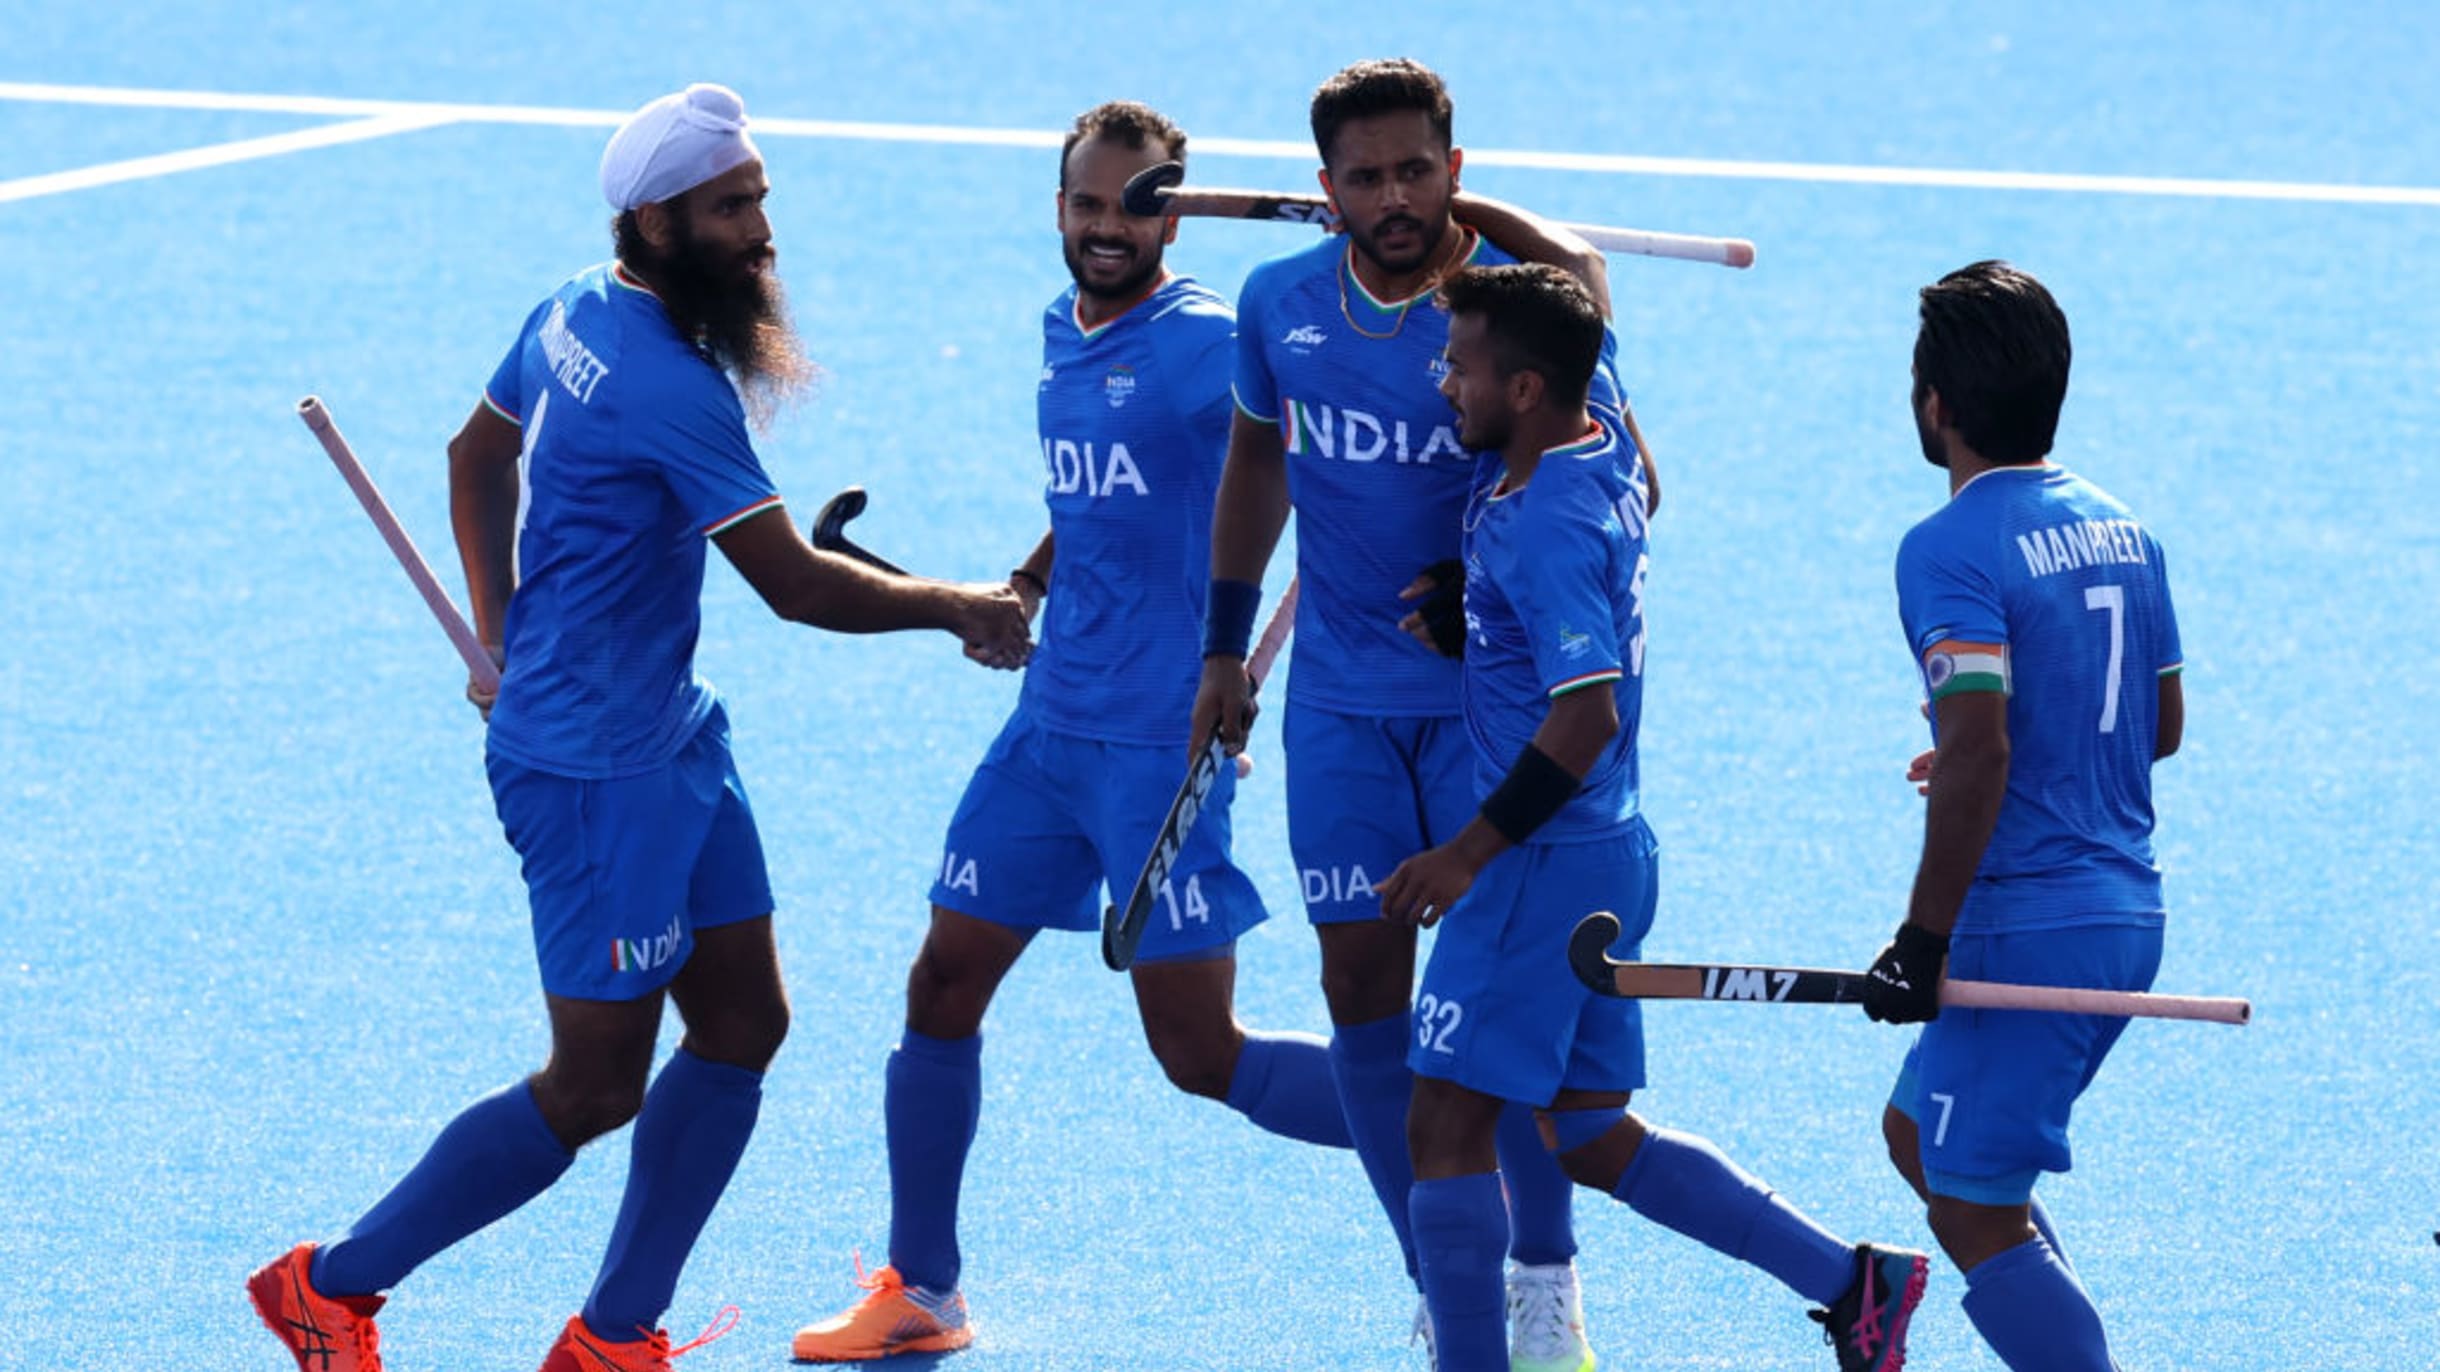 hockey match today live world cup